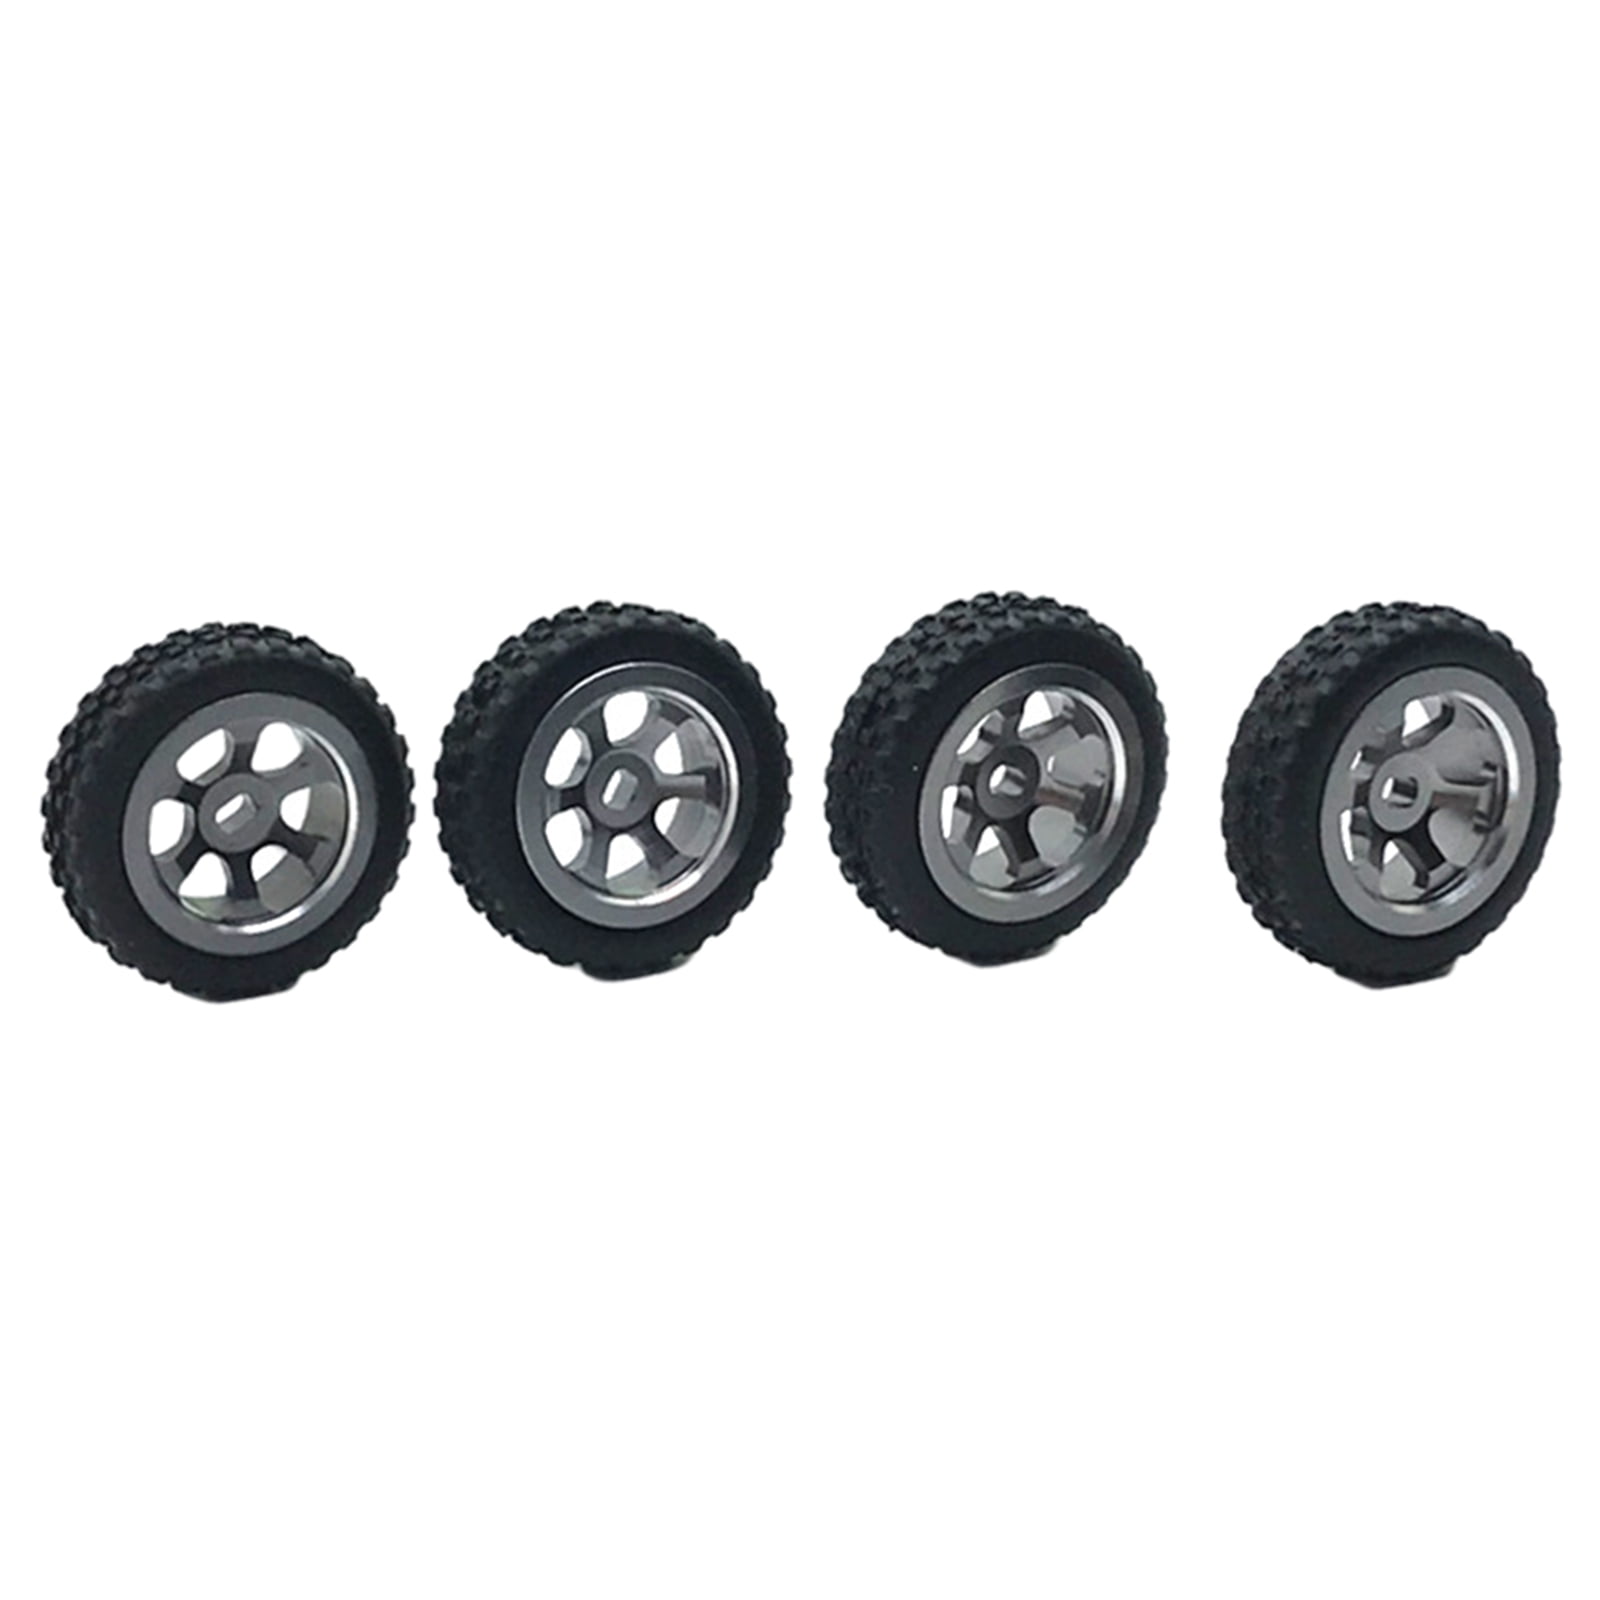 Good Grip Durable Black Plastic Tire Tyres for WLtoys K979 K989 Accessories